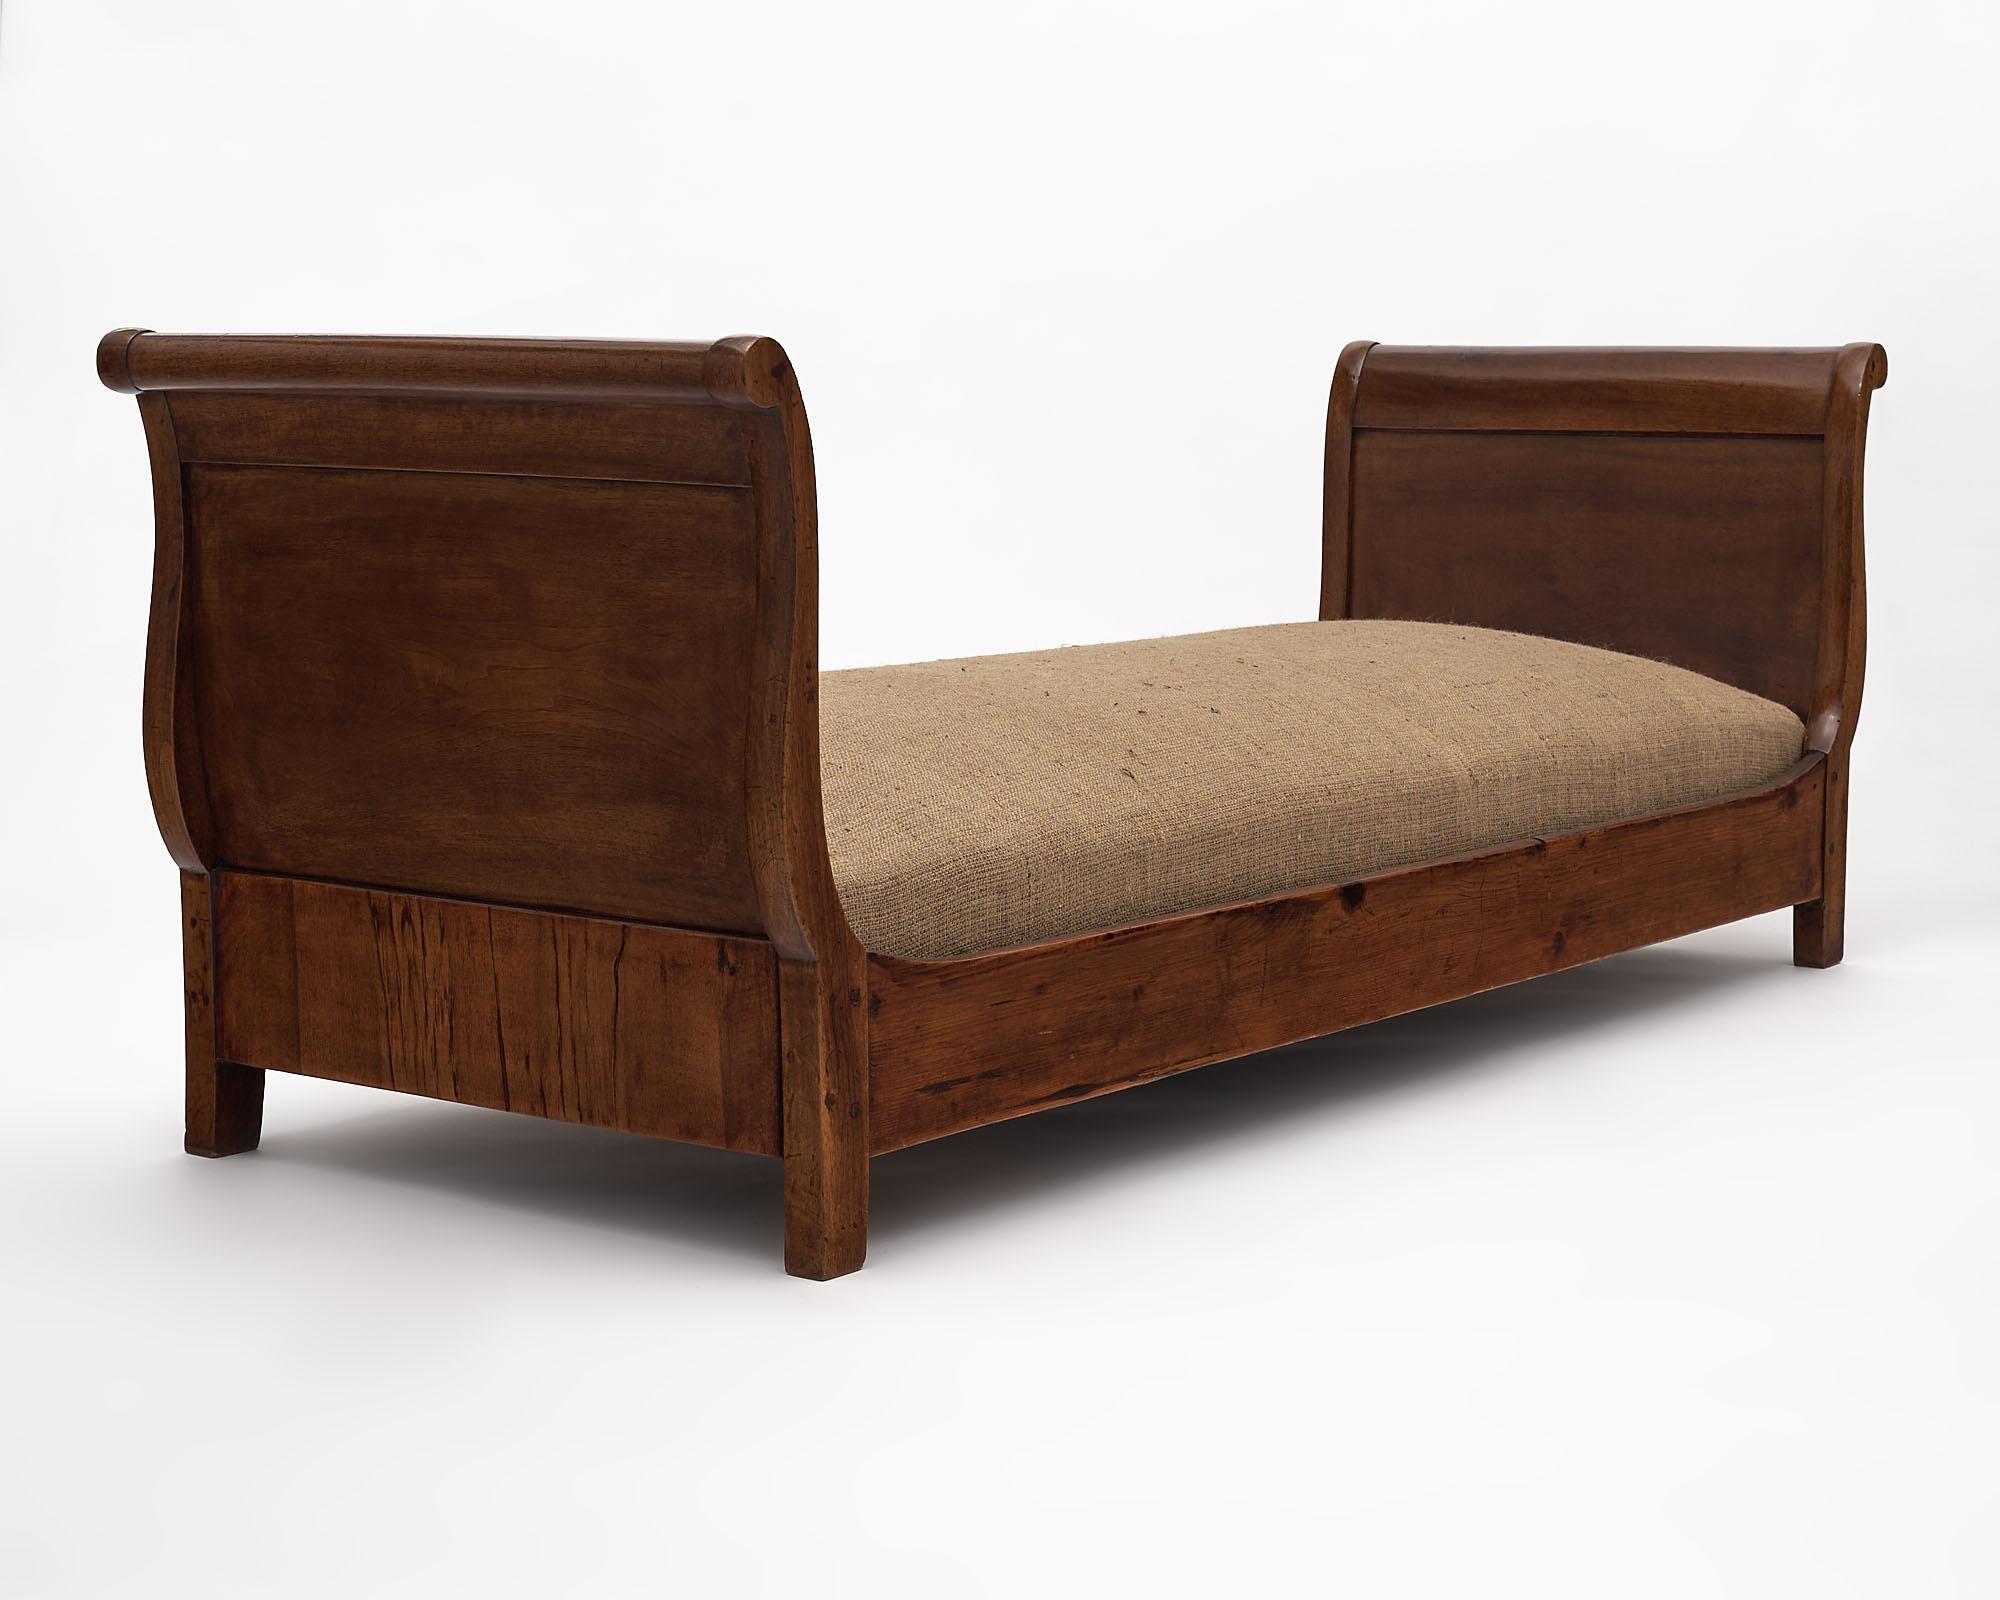 Daybed from France in the Louis Philippe period. This piece has a walnut structure with a beautiful lustrous French polish finish. The seat has been newly upholstered in burlap.